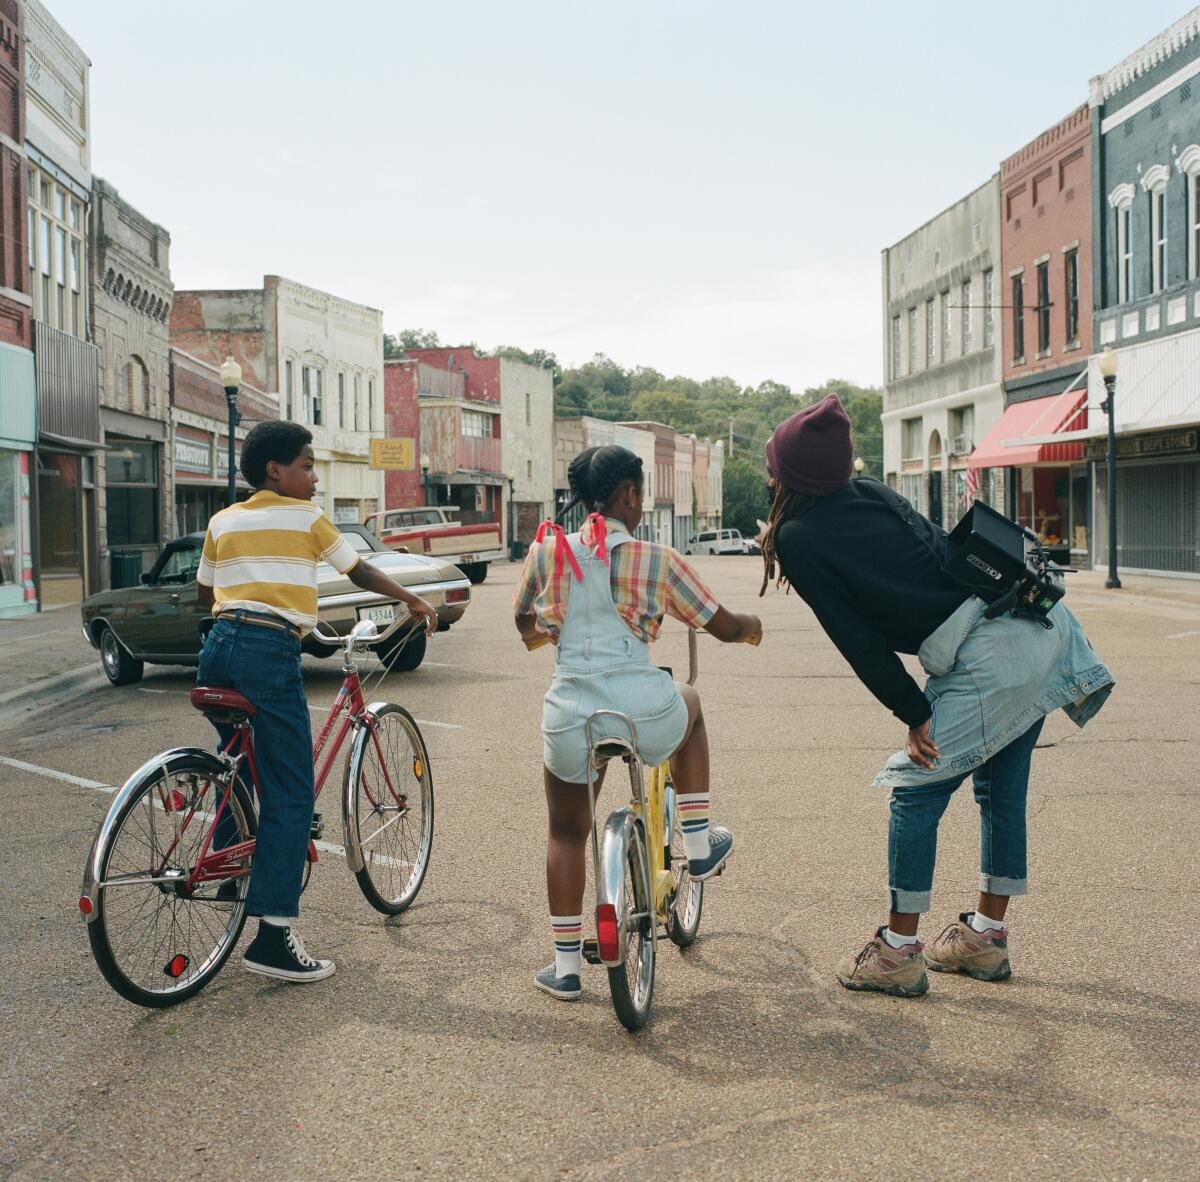 A woman directs two children on bicycles.